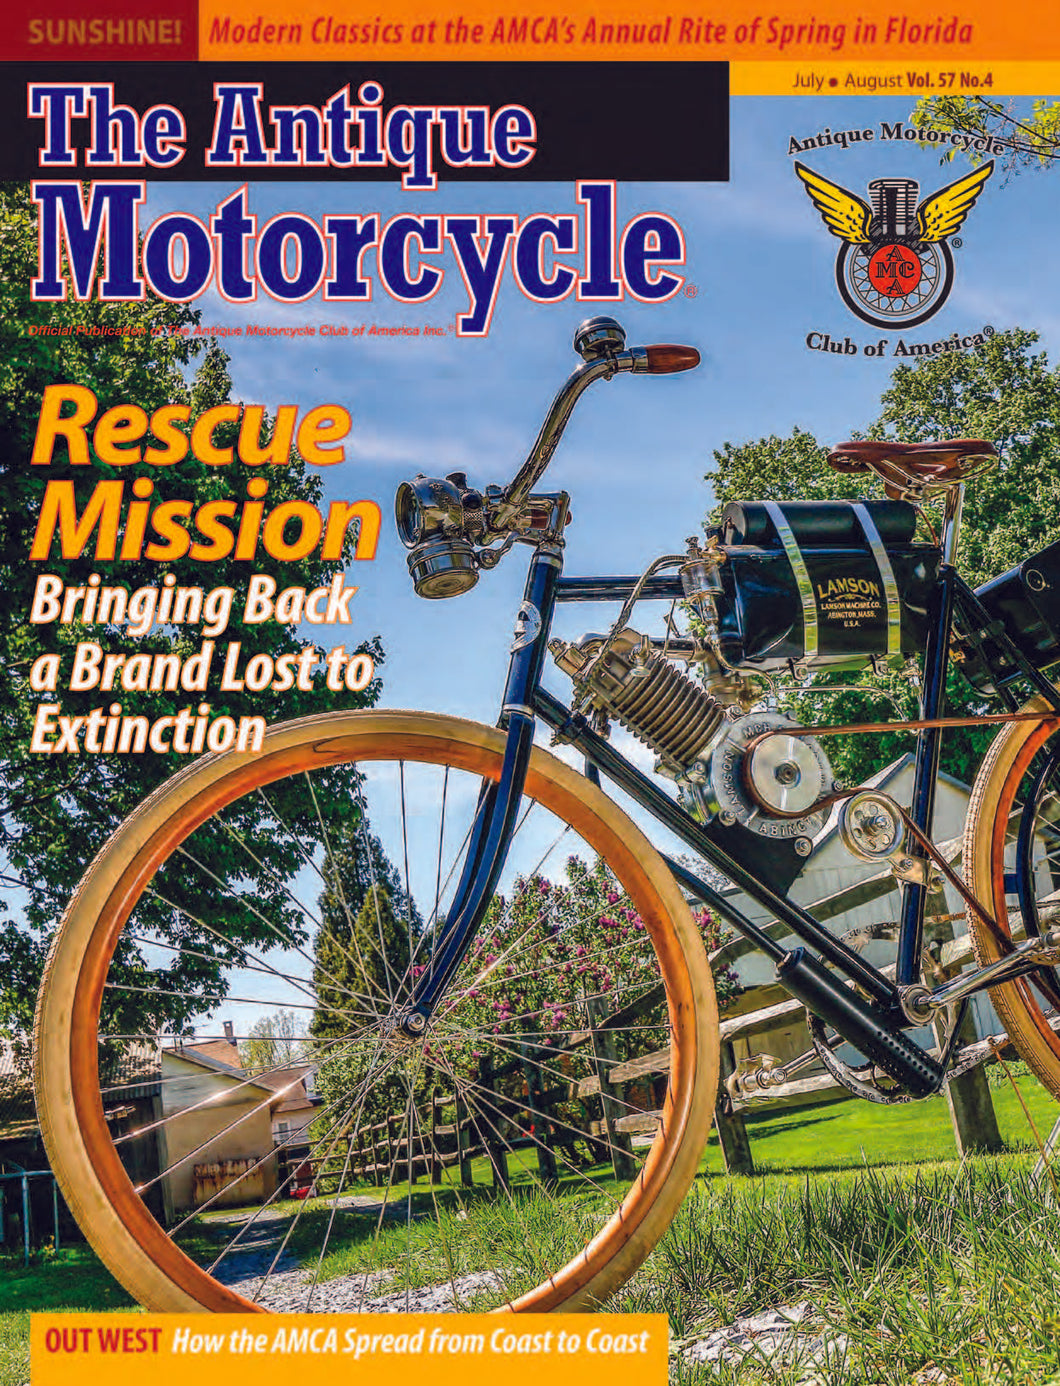 The Antique Motorcycle: Vol. 57, Iss. 4 - July/Aug 2018 Magazine